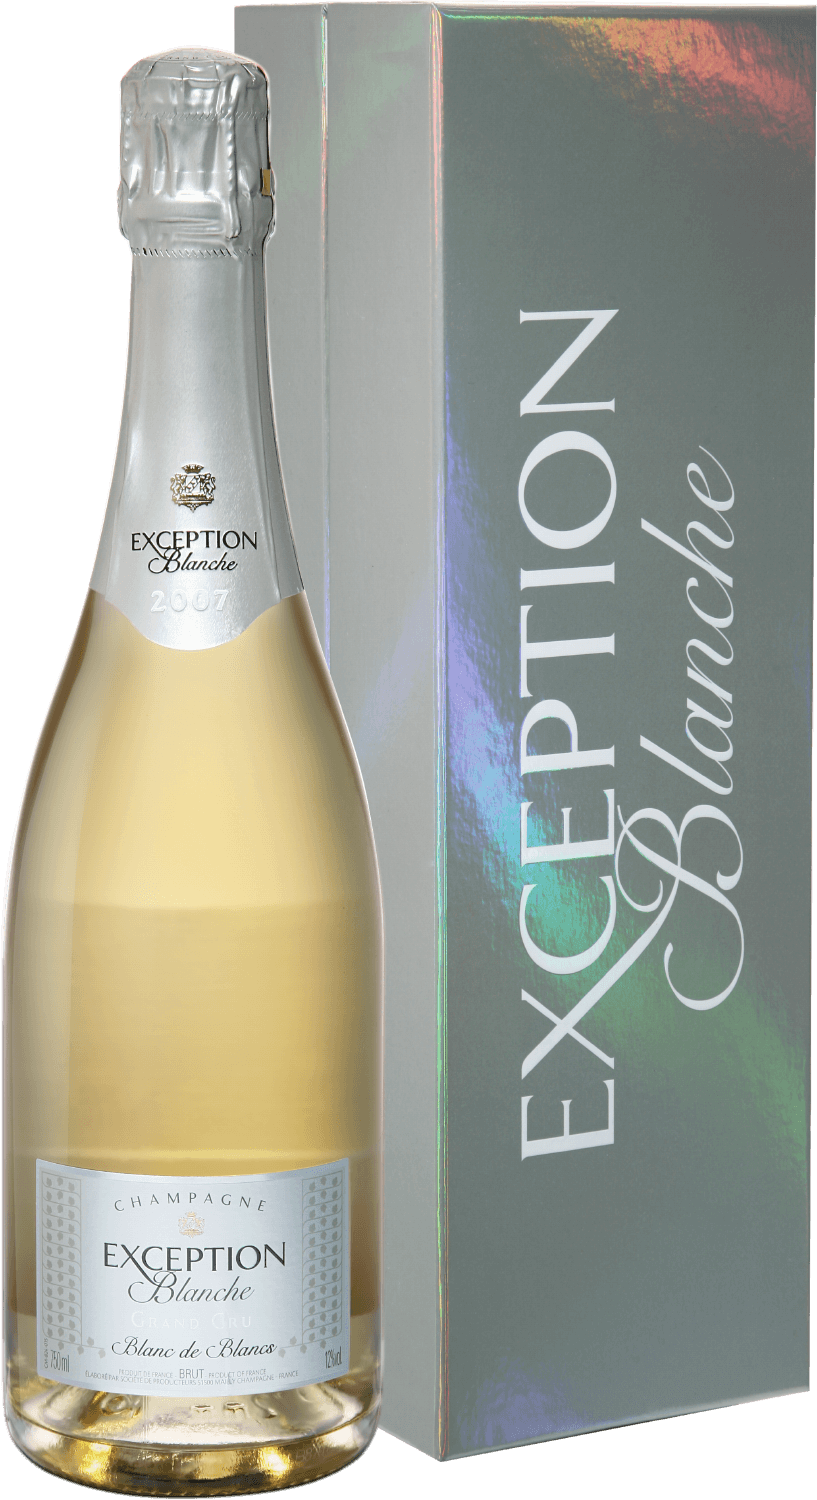 Mailly Grand Cru Exception Blanche Blanc De Blancs Millesime Champagne AOC (gift box) mailly grand cru l’intemporelle brut millesime champagne аос gift box